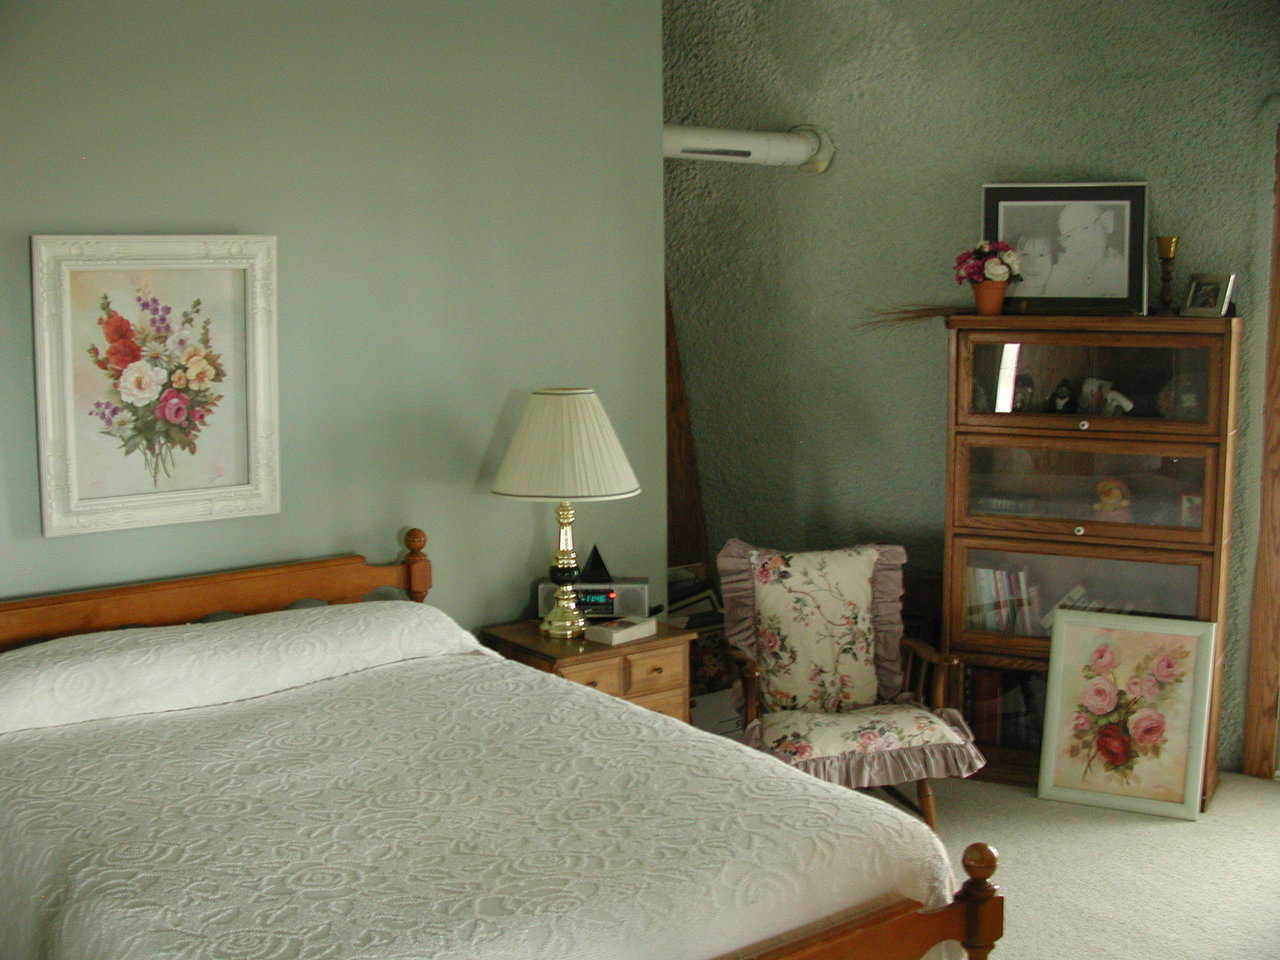 Cozy bedroom — It’s decorated with floral prints.